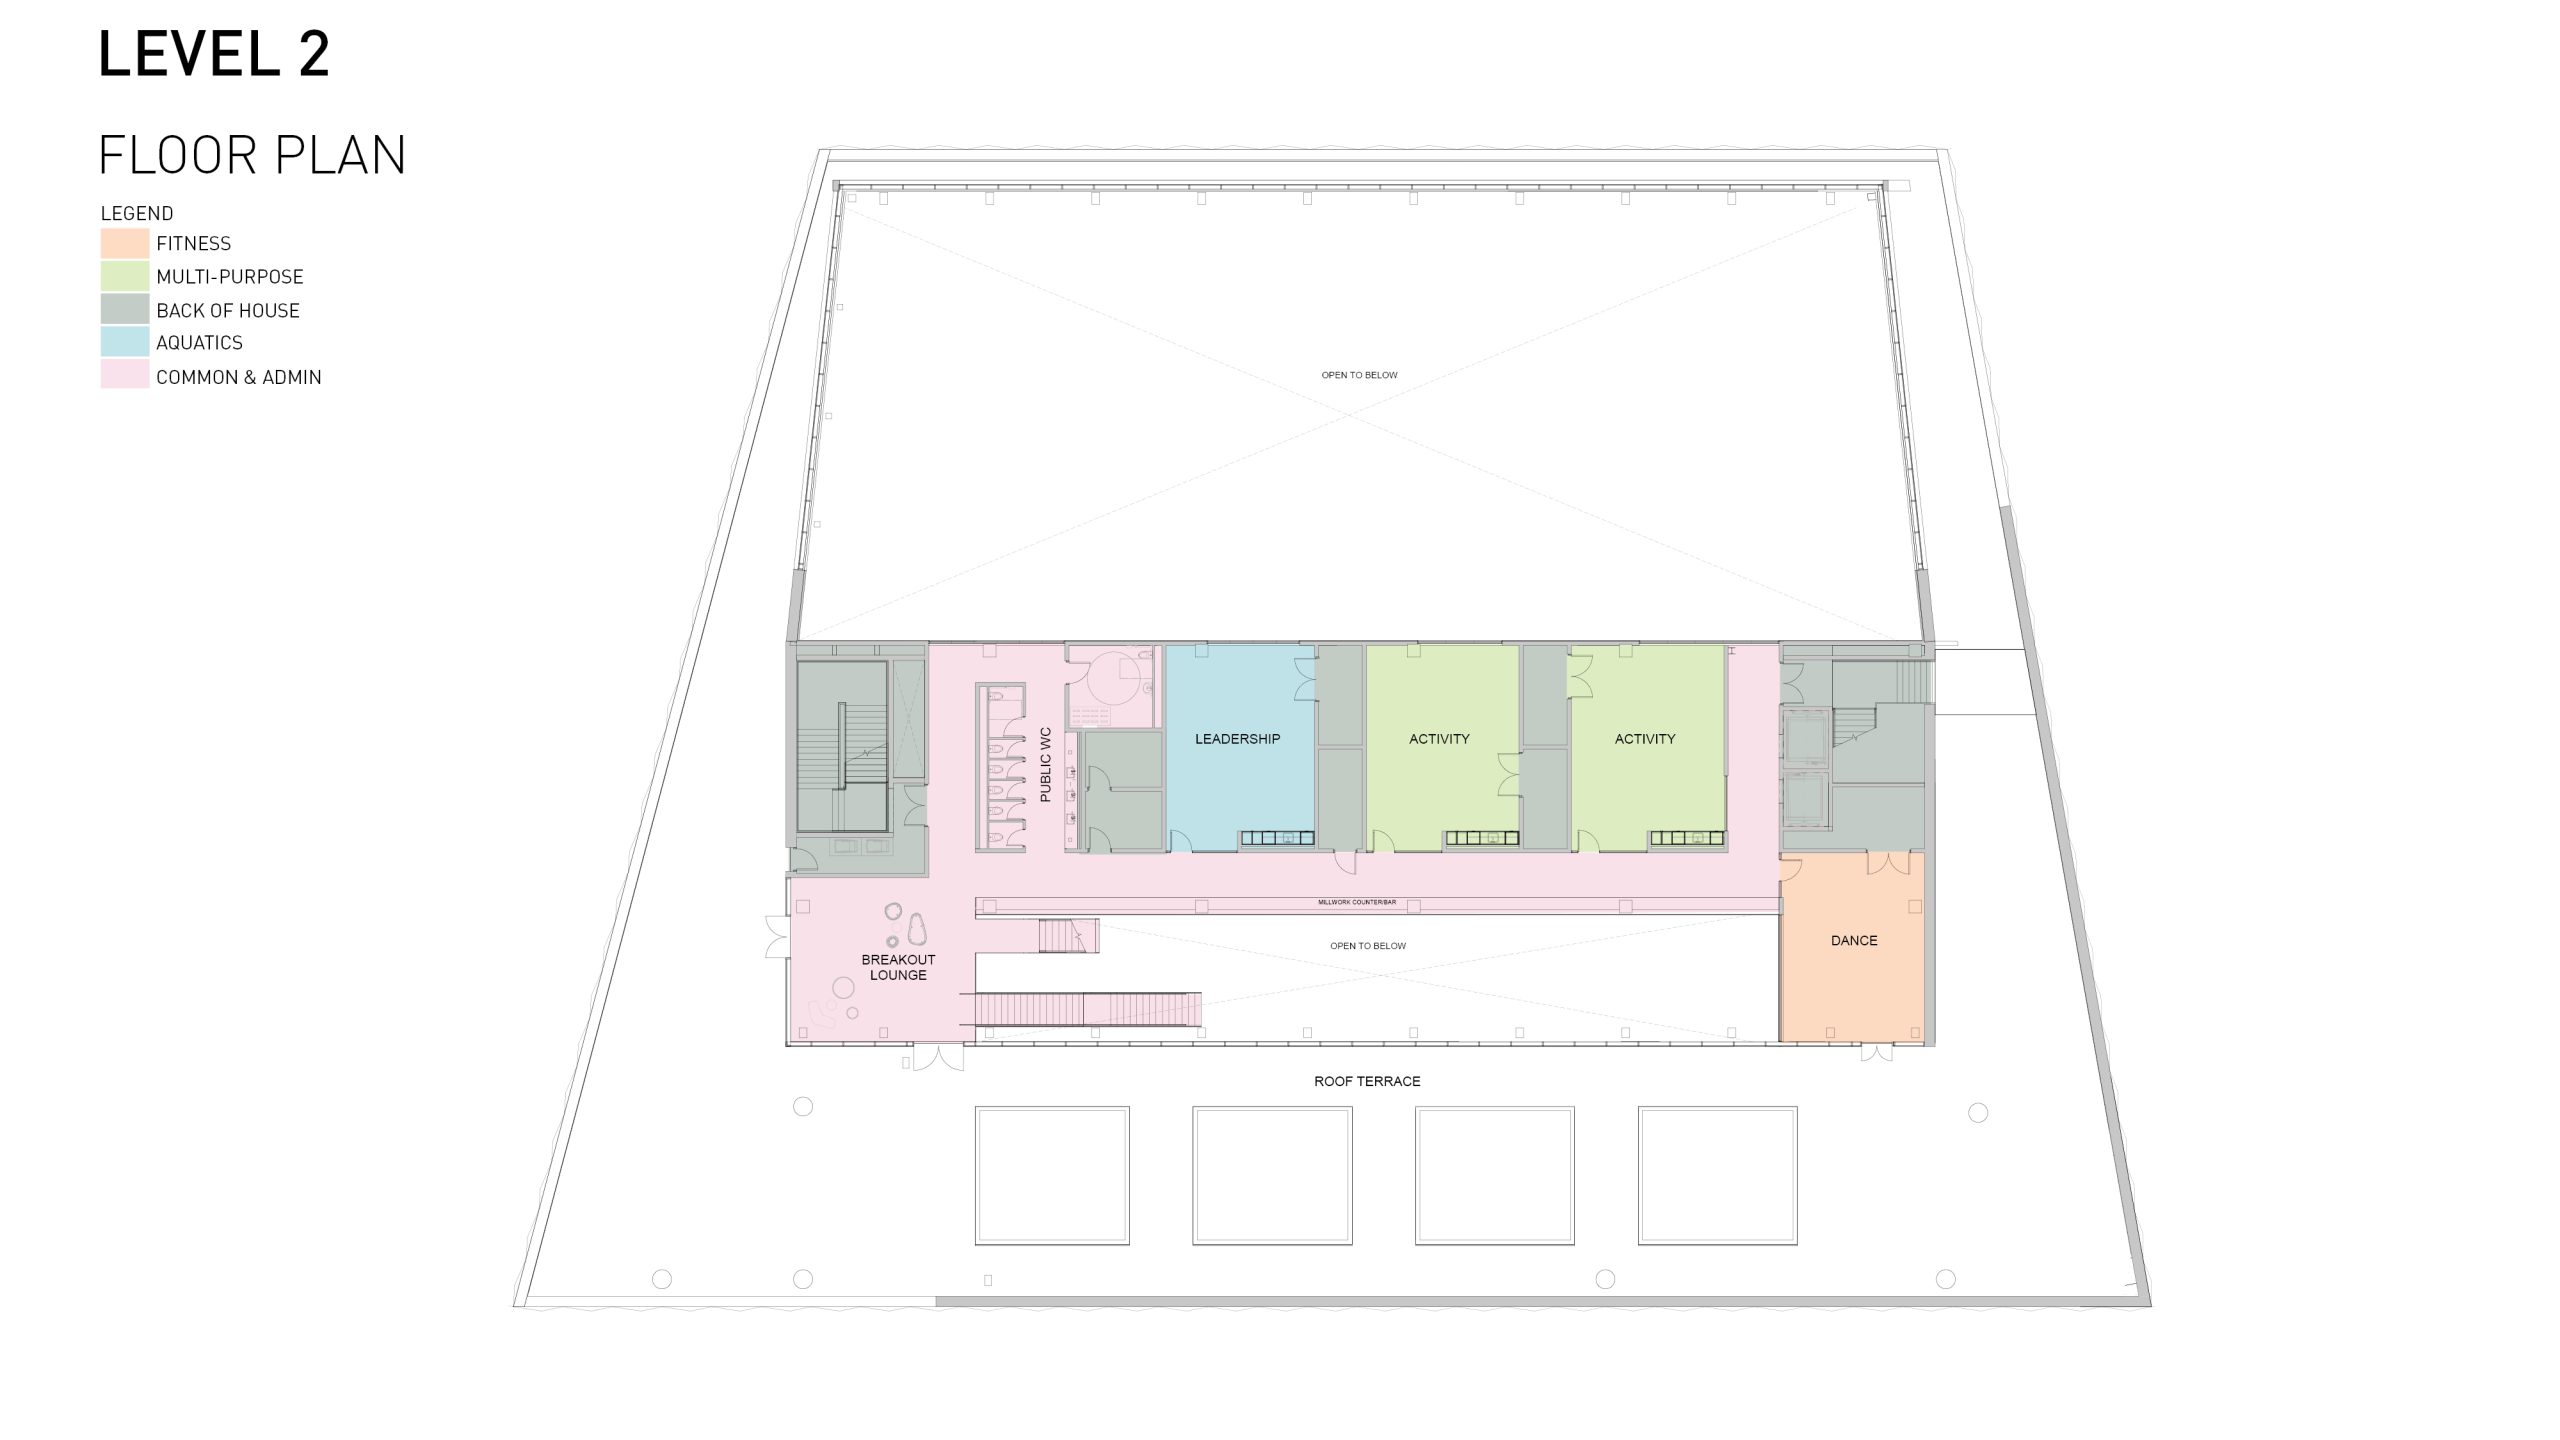 Floor plan of level two shows two activity rooms and a leadership room along the centre of the building. There is a dance studio on the South East side of the building and a breakout lounge on the Southwest of the building. An angular rooftop terrace wraps around the south, east and west of the building.